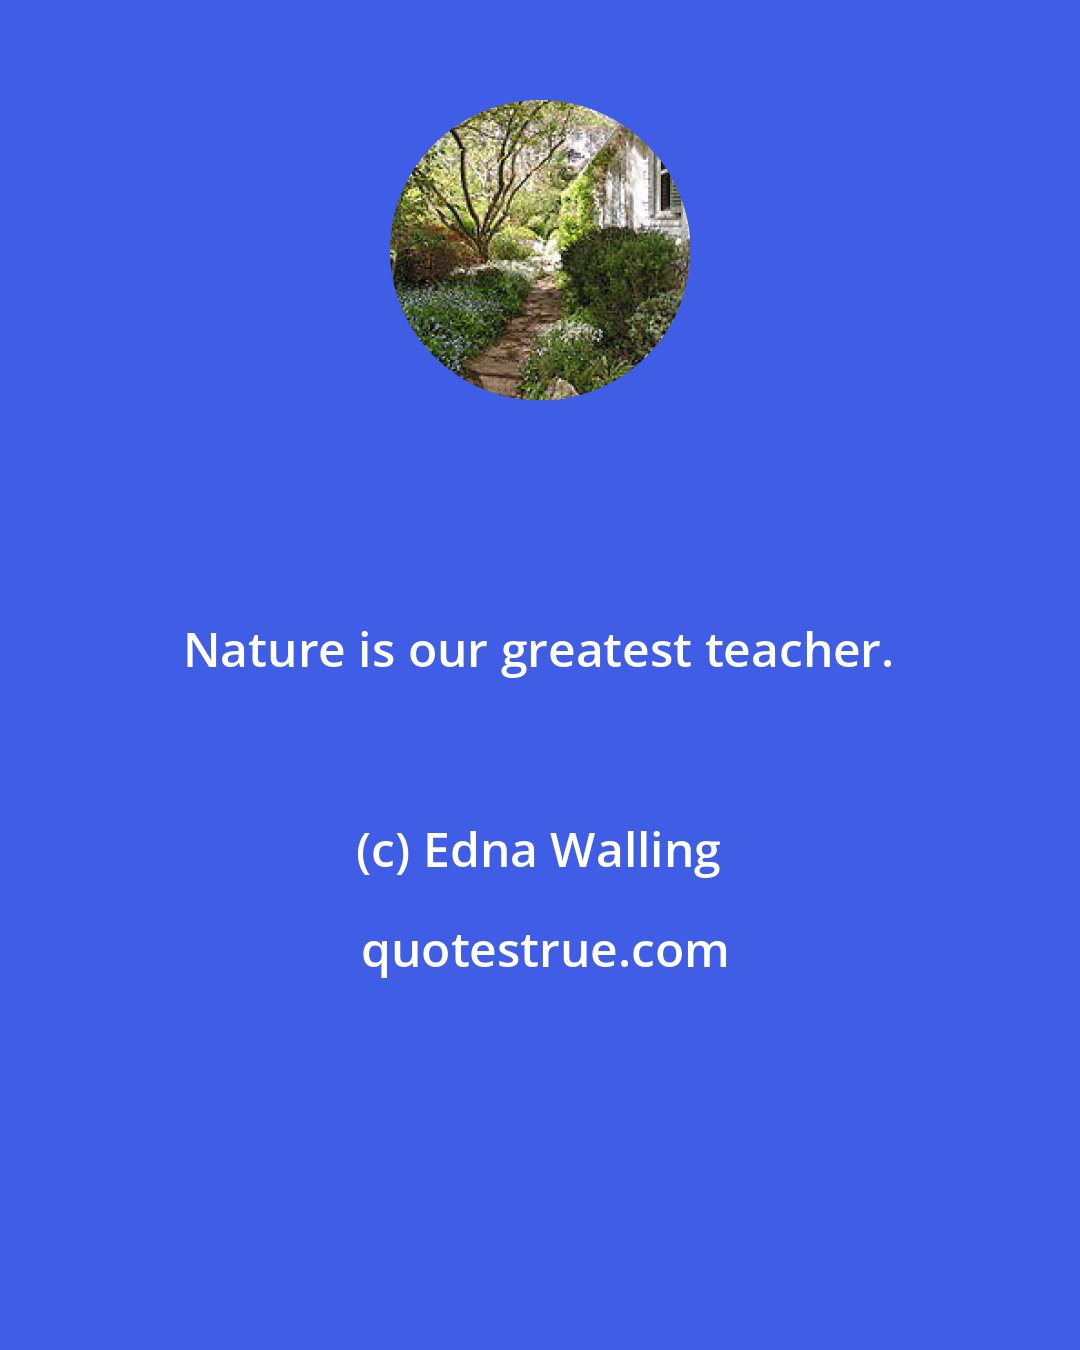 Edna Walling: Nature is our greatest teacher.